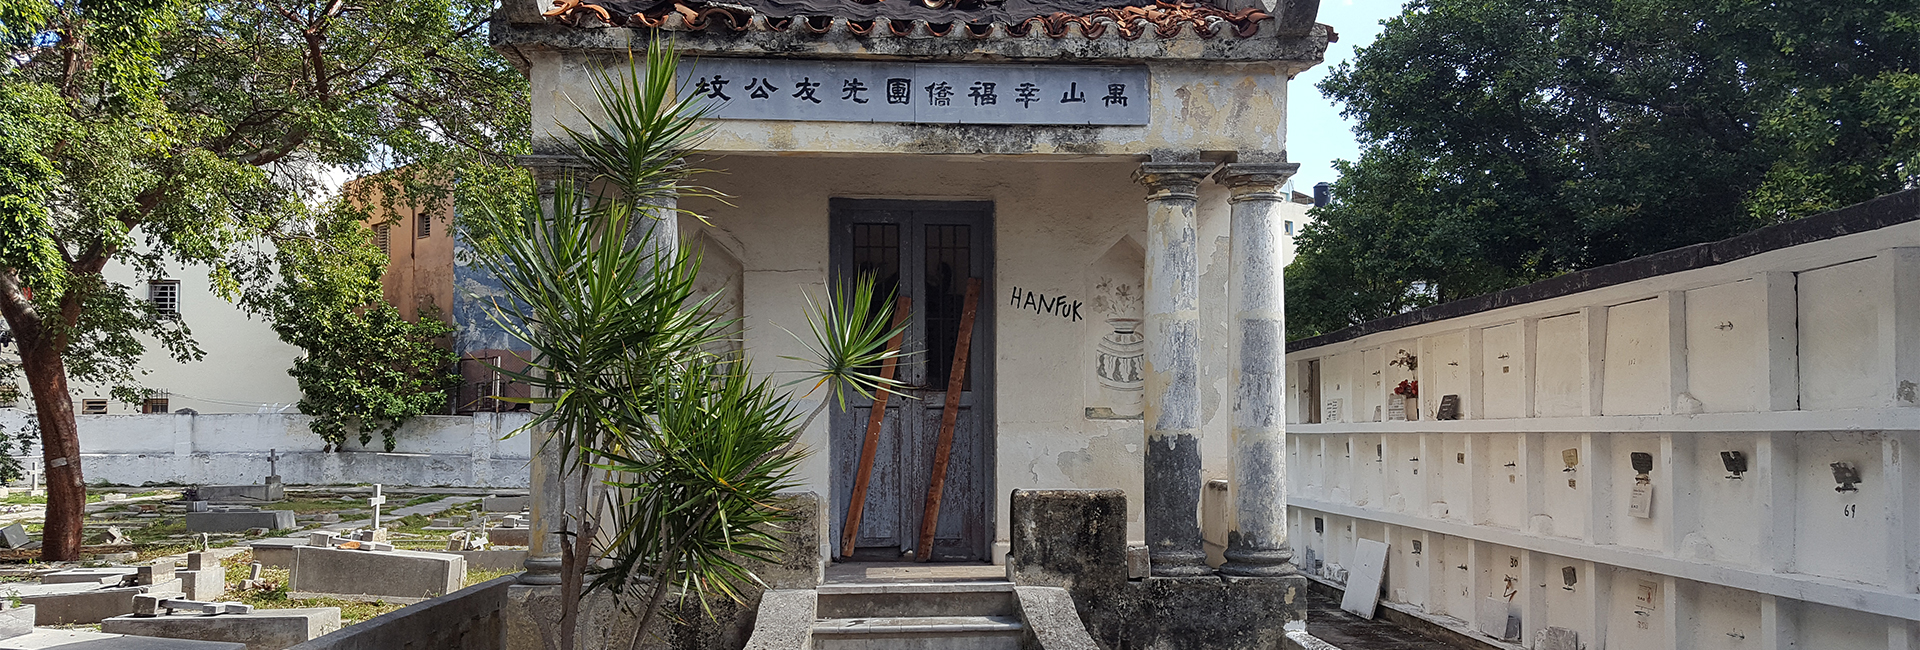 Chinese Influences on Life and Religion in Cuba